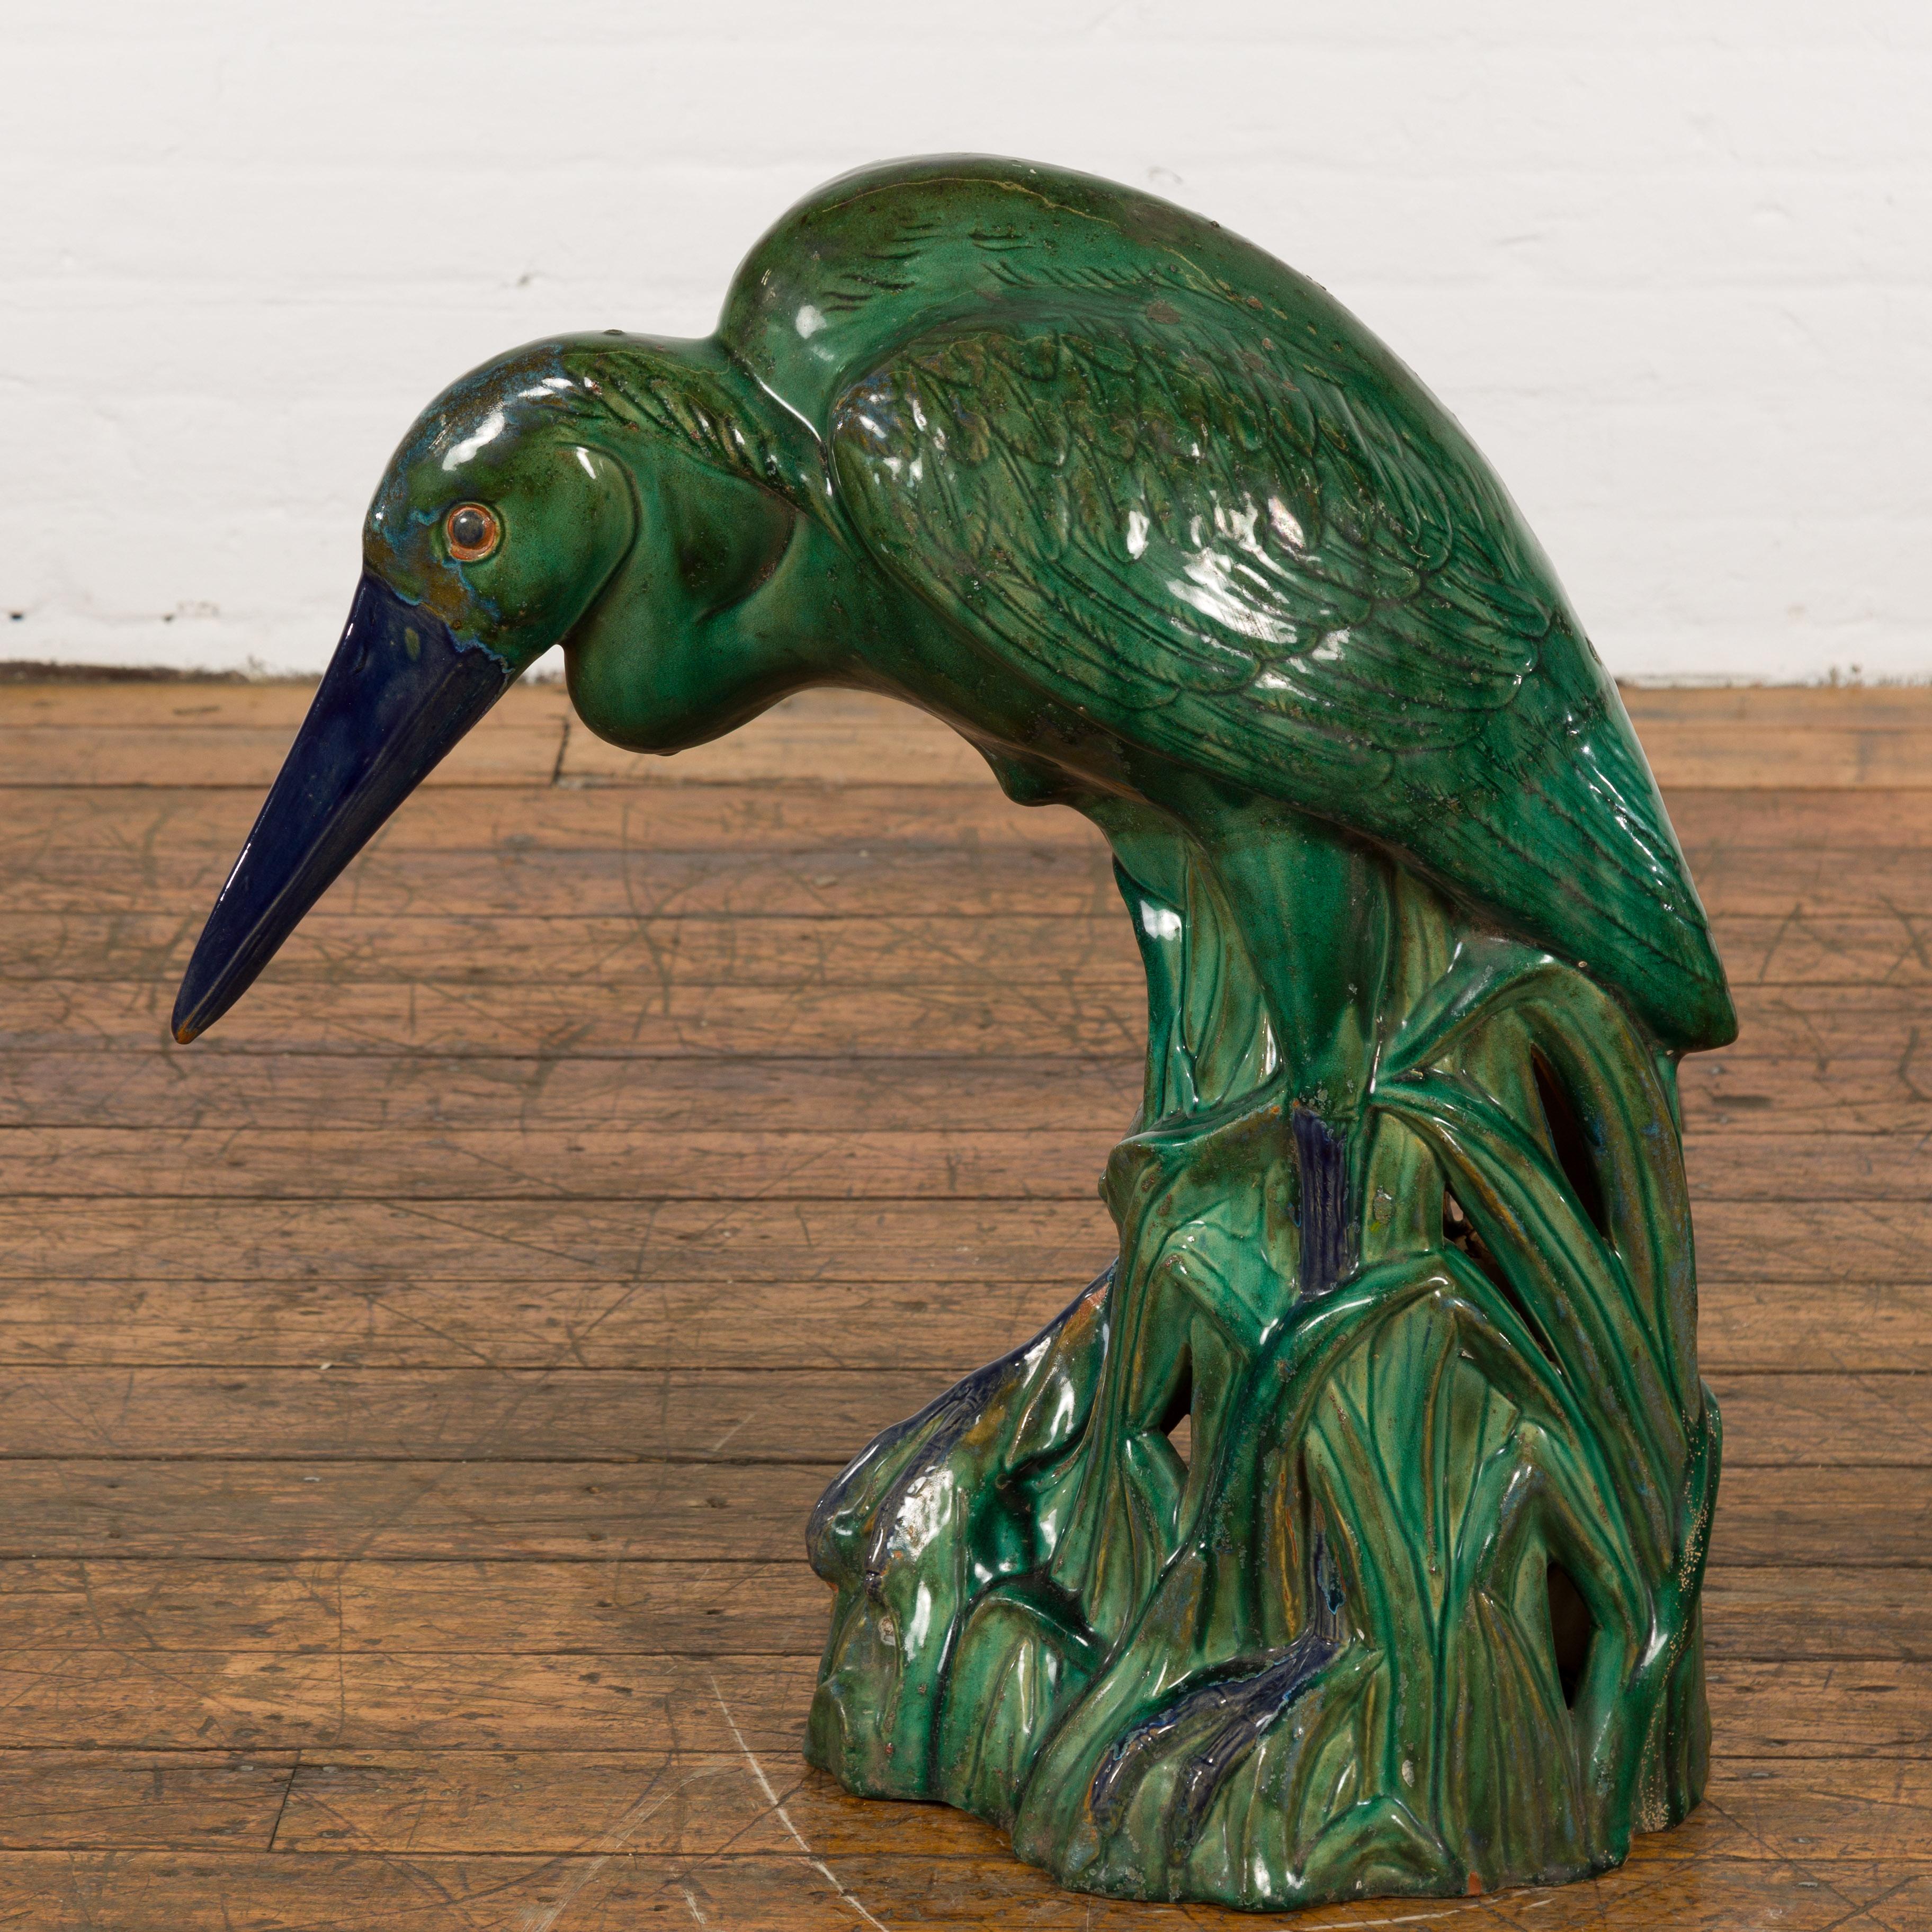 Lifesize Chinese Vintage Green and Blue Glazed Ceramic Heron Bird Sculpture For Sale 5